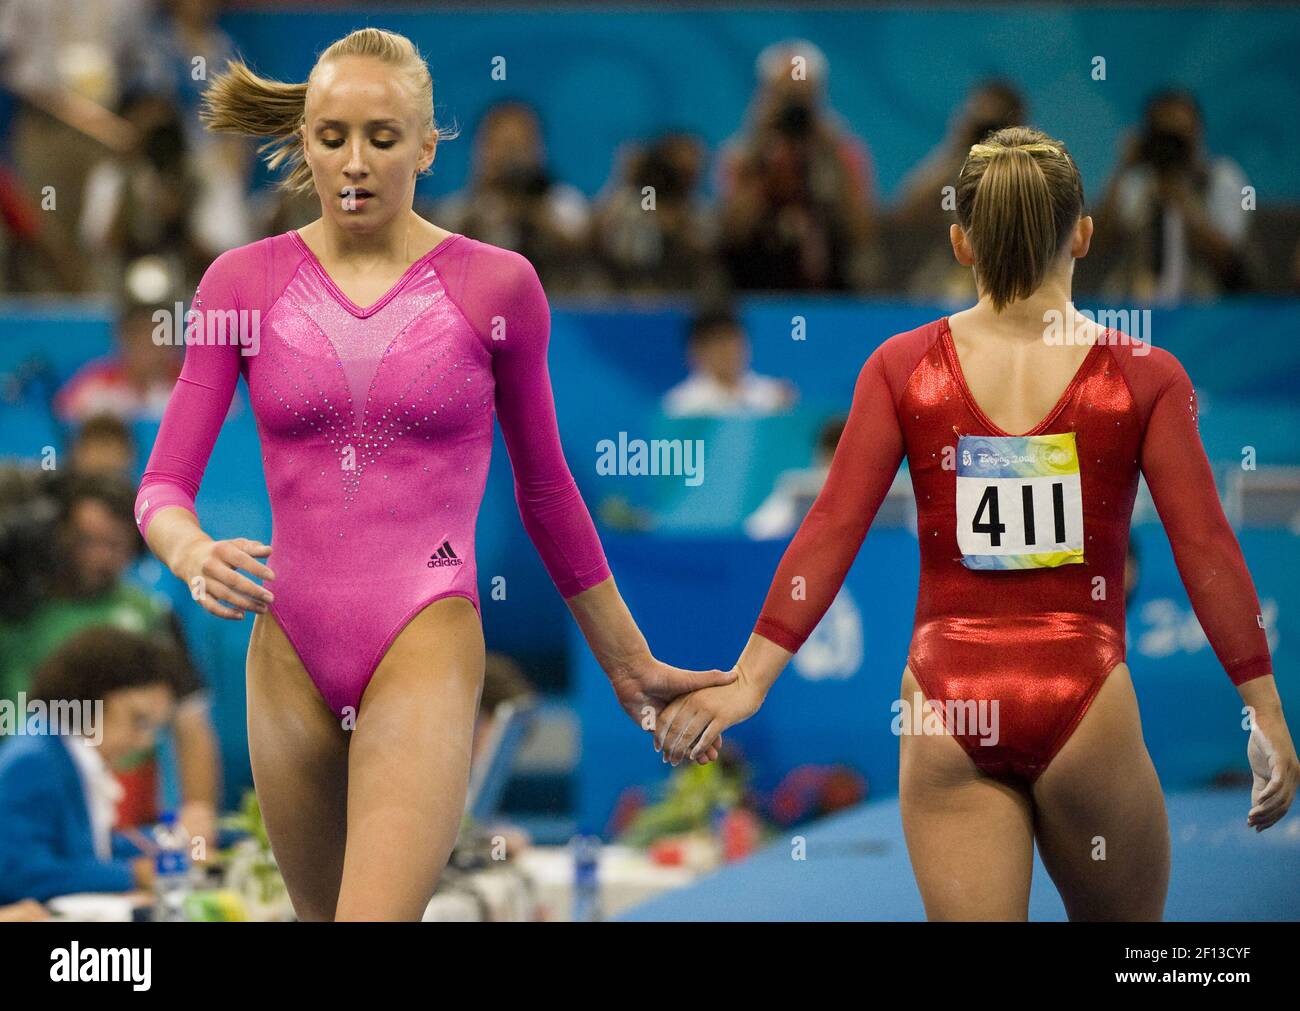 Nastia Liukin of the United States clasps hands with fellow American Shawn Johnson after competing on the floor exercise on her way to winning gold during the Women's Individual All-Around Friday, August 15, 2008 in the Games of the the XXIX Olympiad in Beijing, China. Johnson won silver. (Photo by Paul Kitagaki/Sacramento Bee/MCT/Sipa USA) Stock Photo